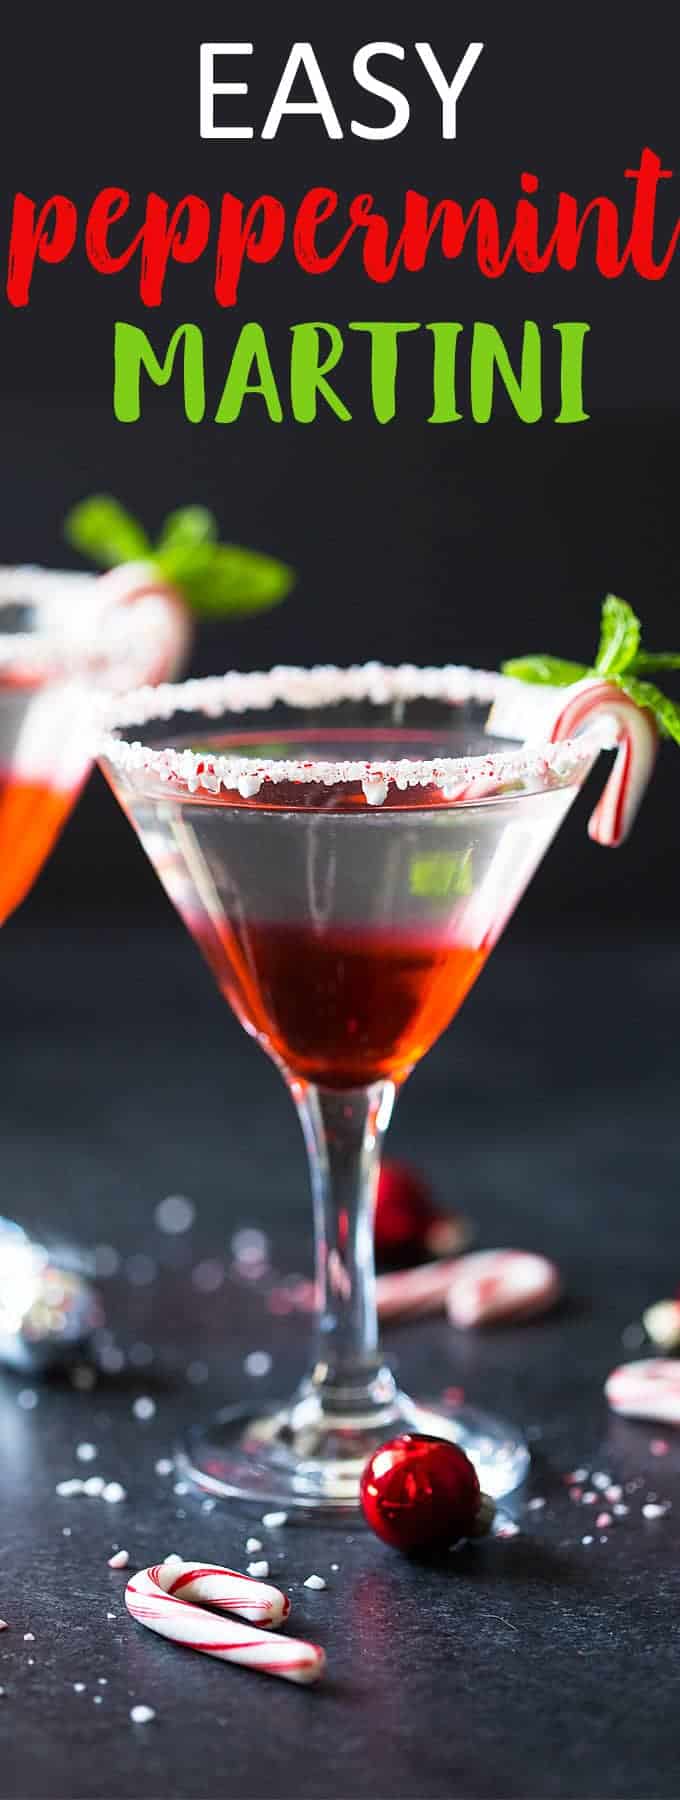 Front view of a peppermint martini in a glass with a crushed peppermint rim.